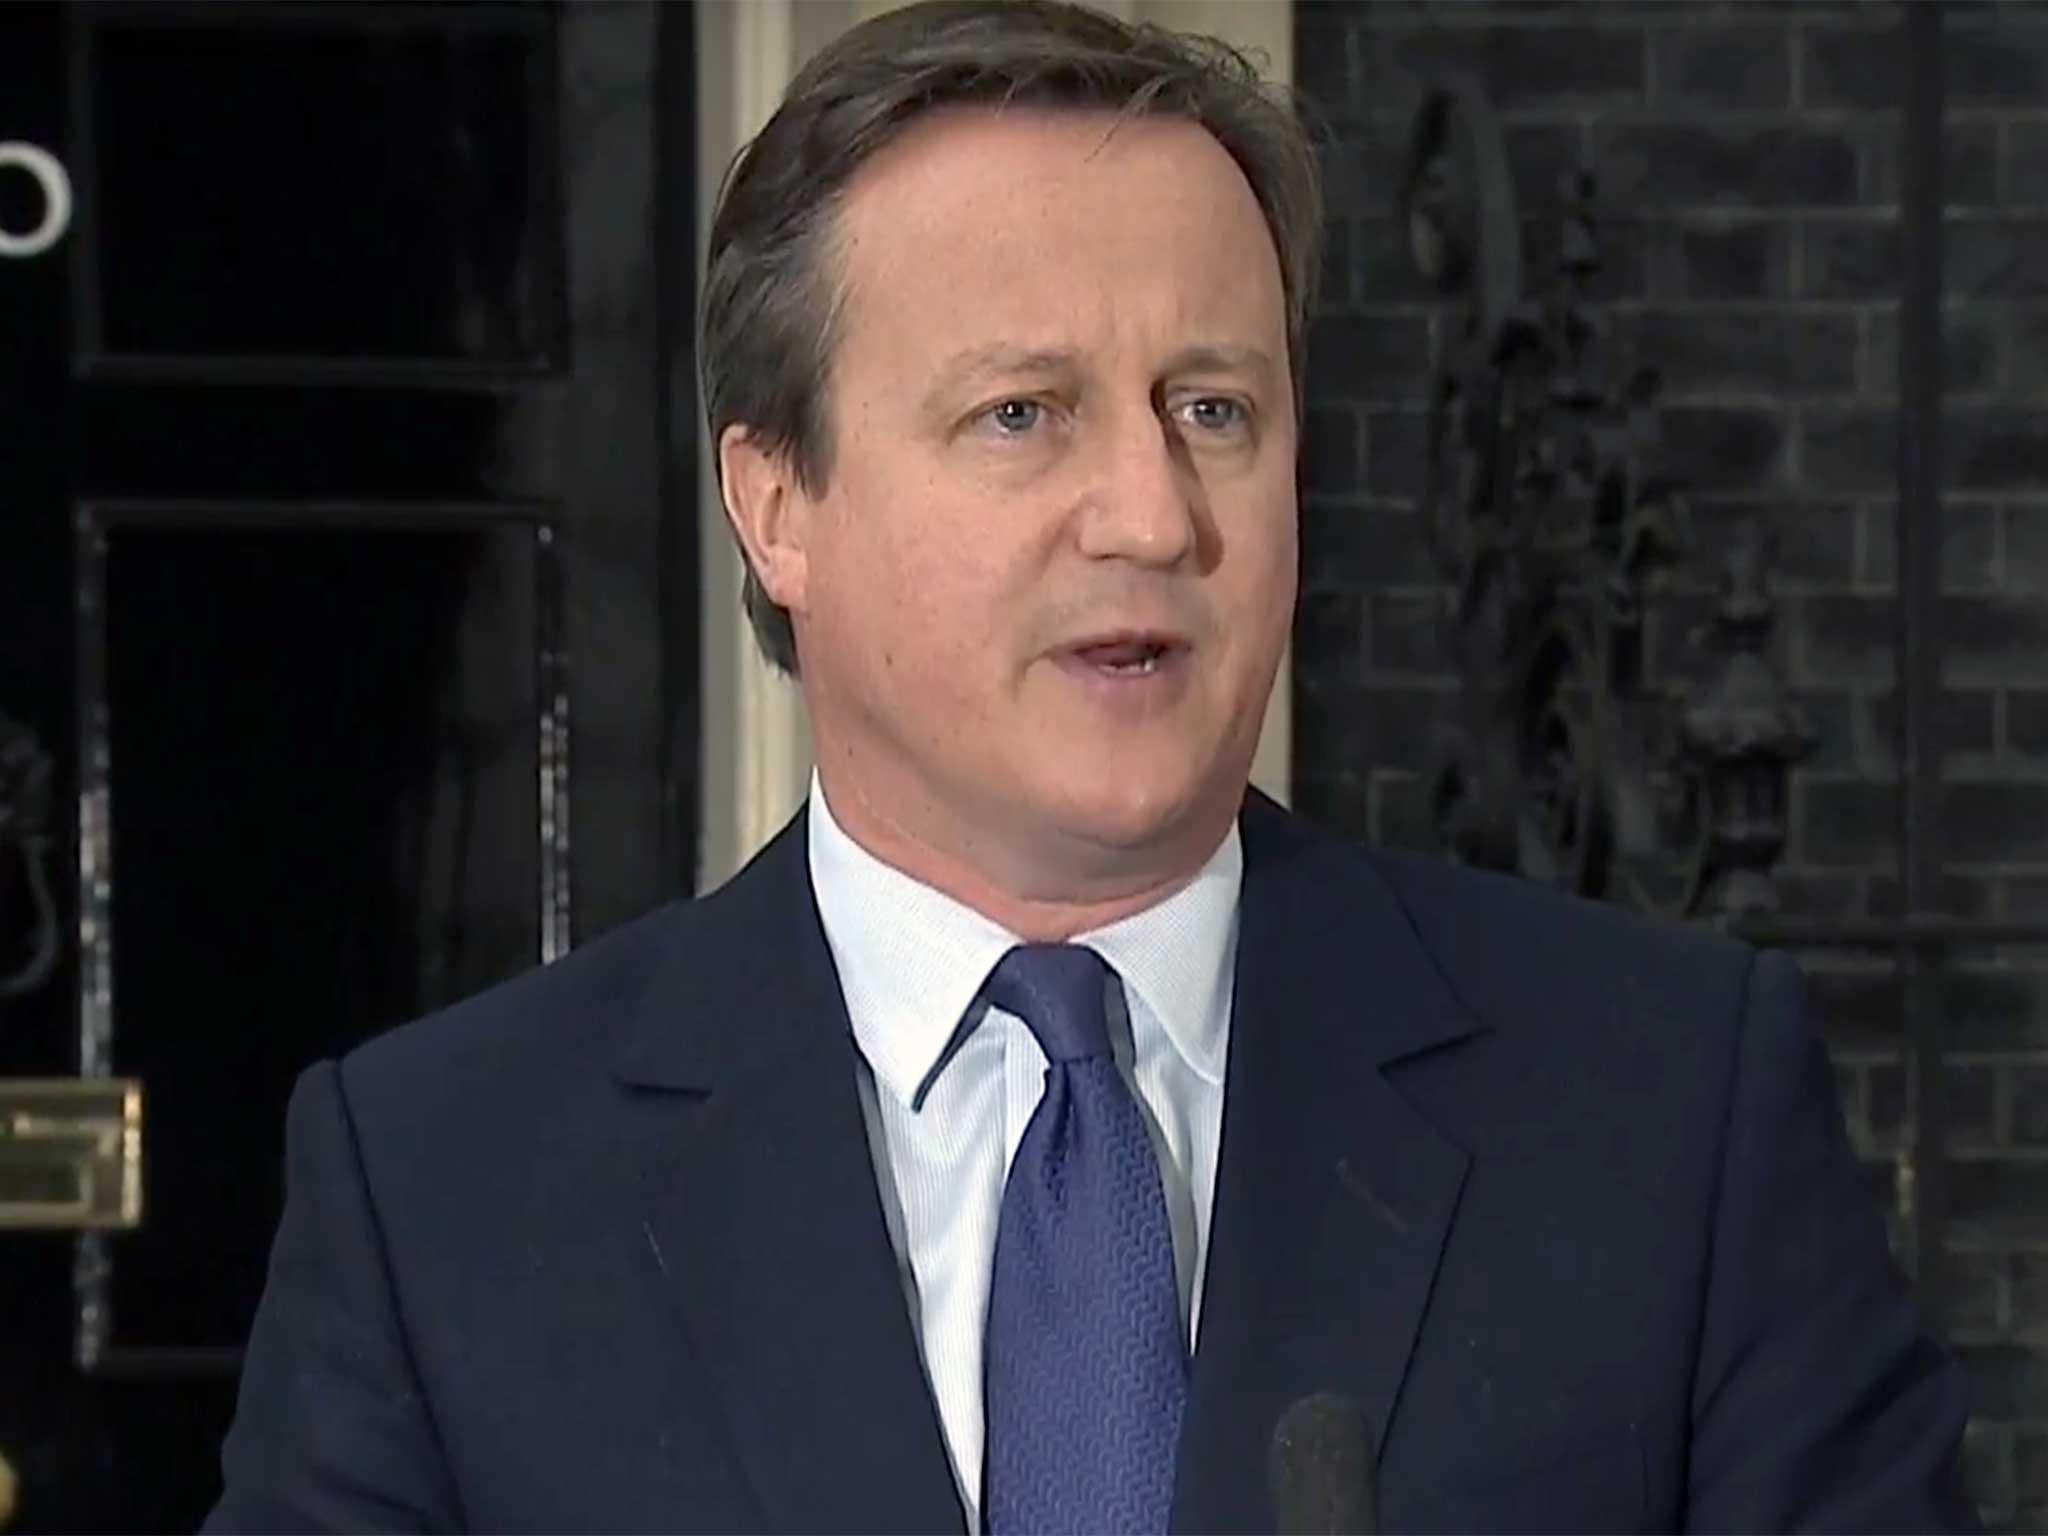 David Cameron created 13 new Conservative peers in his resignation honours list